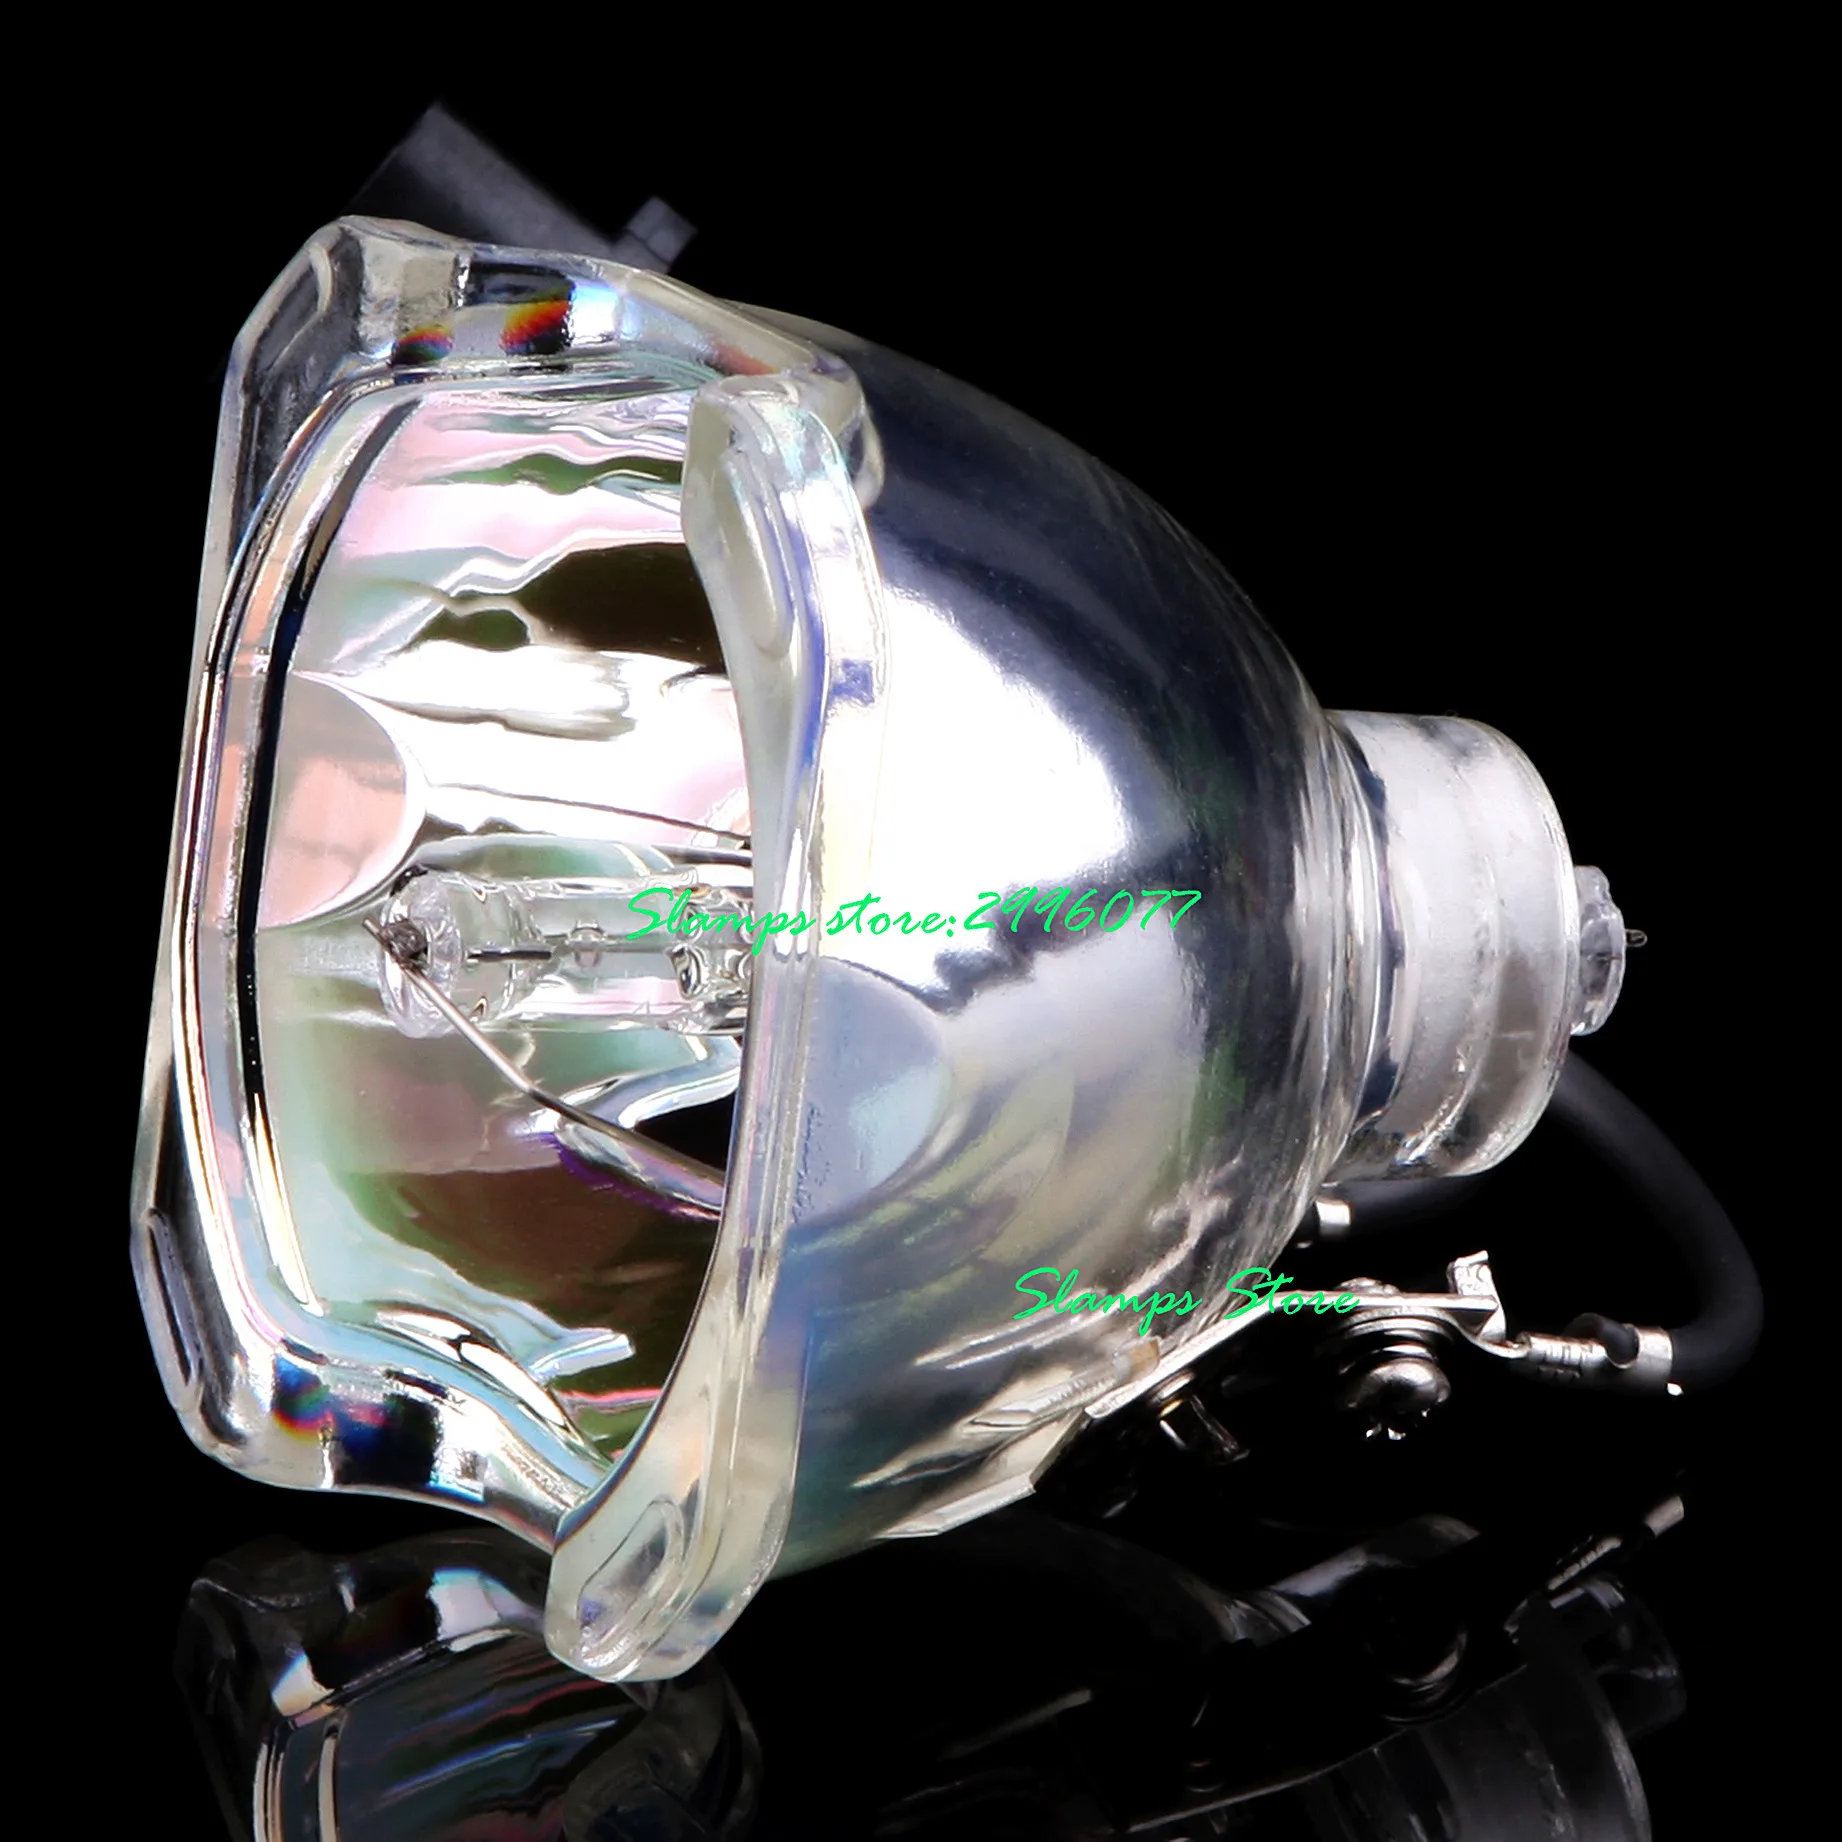 NP39LP Replacement Lamp Original Quality Bulb with Housing for NEC NP-P502H NP-P502W P502H P502HL P502W Projector by Stanlamp